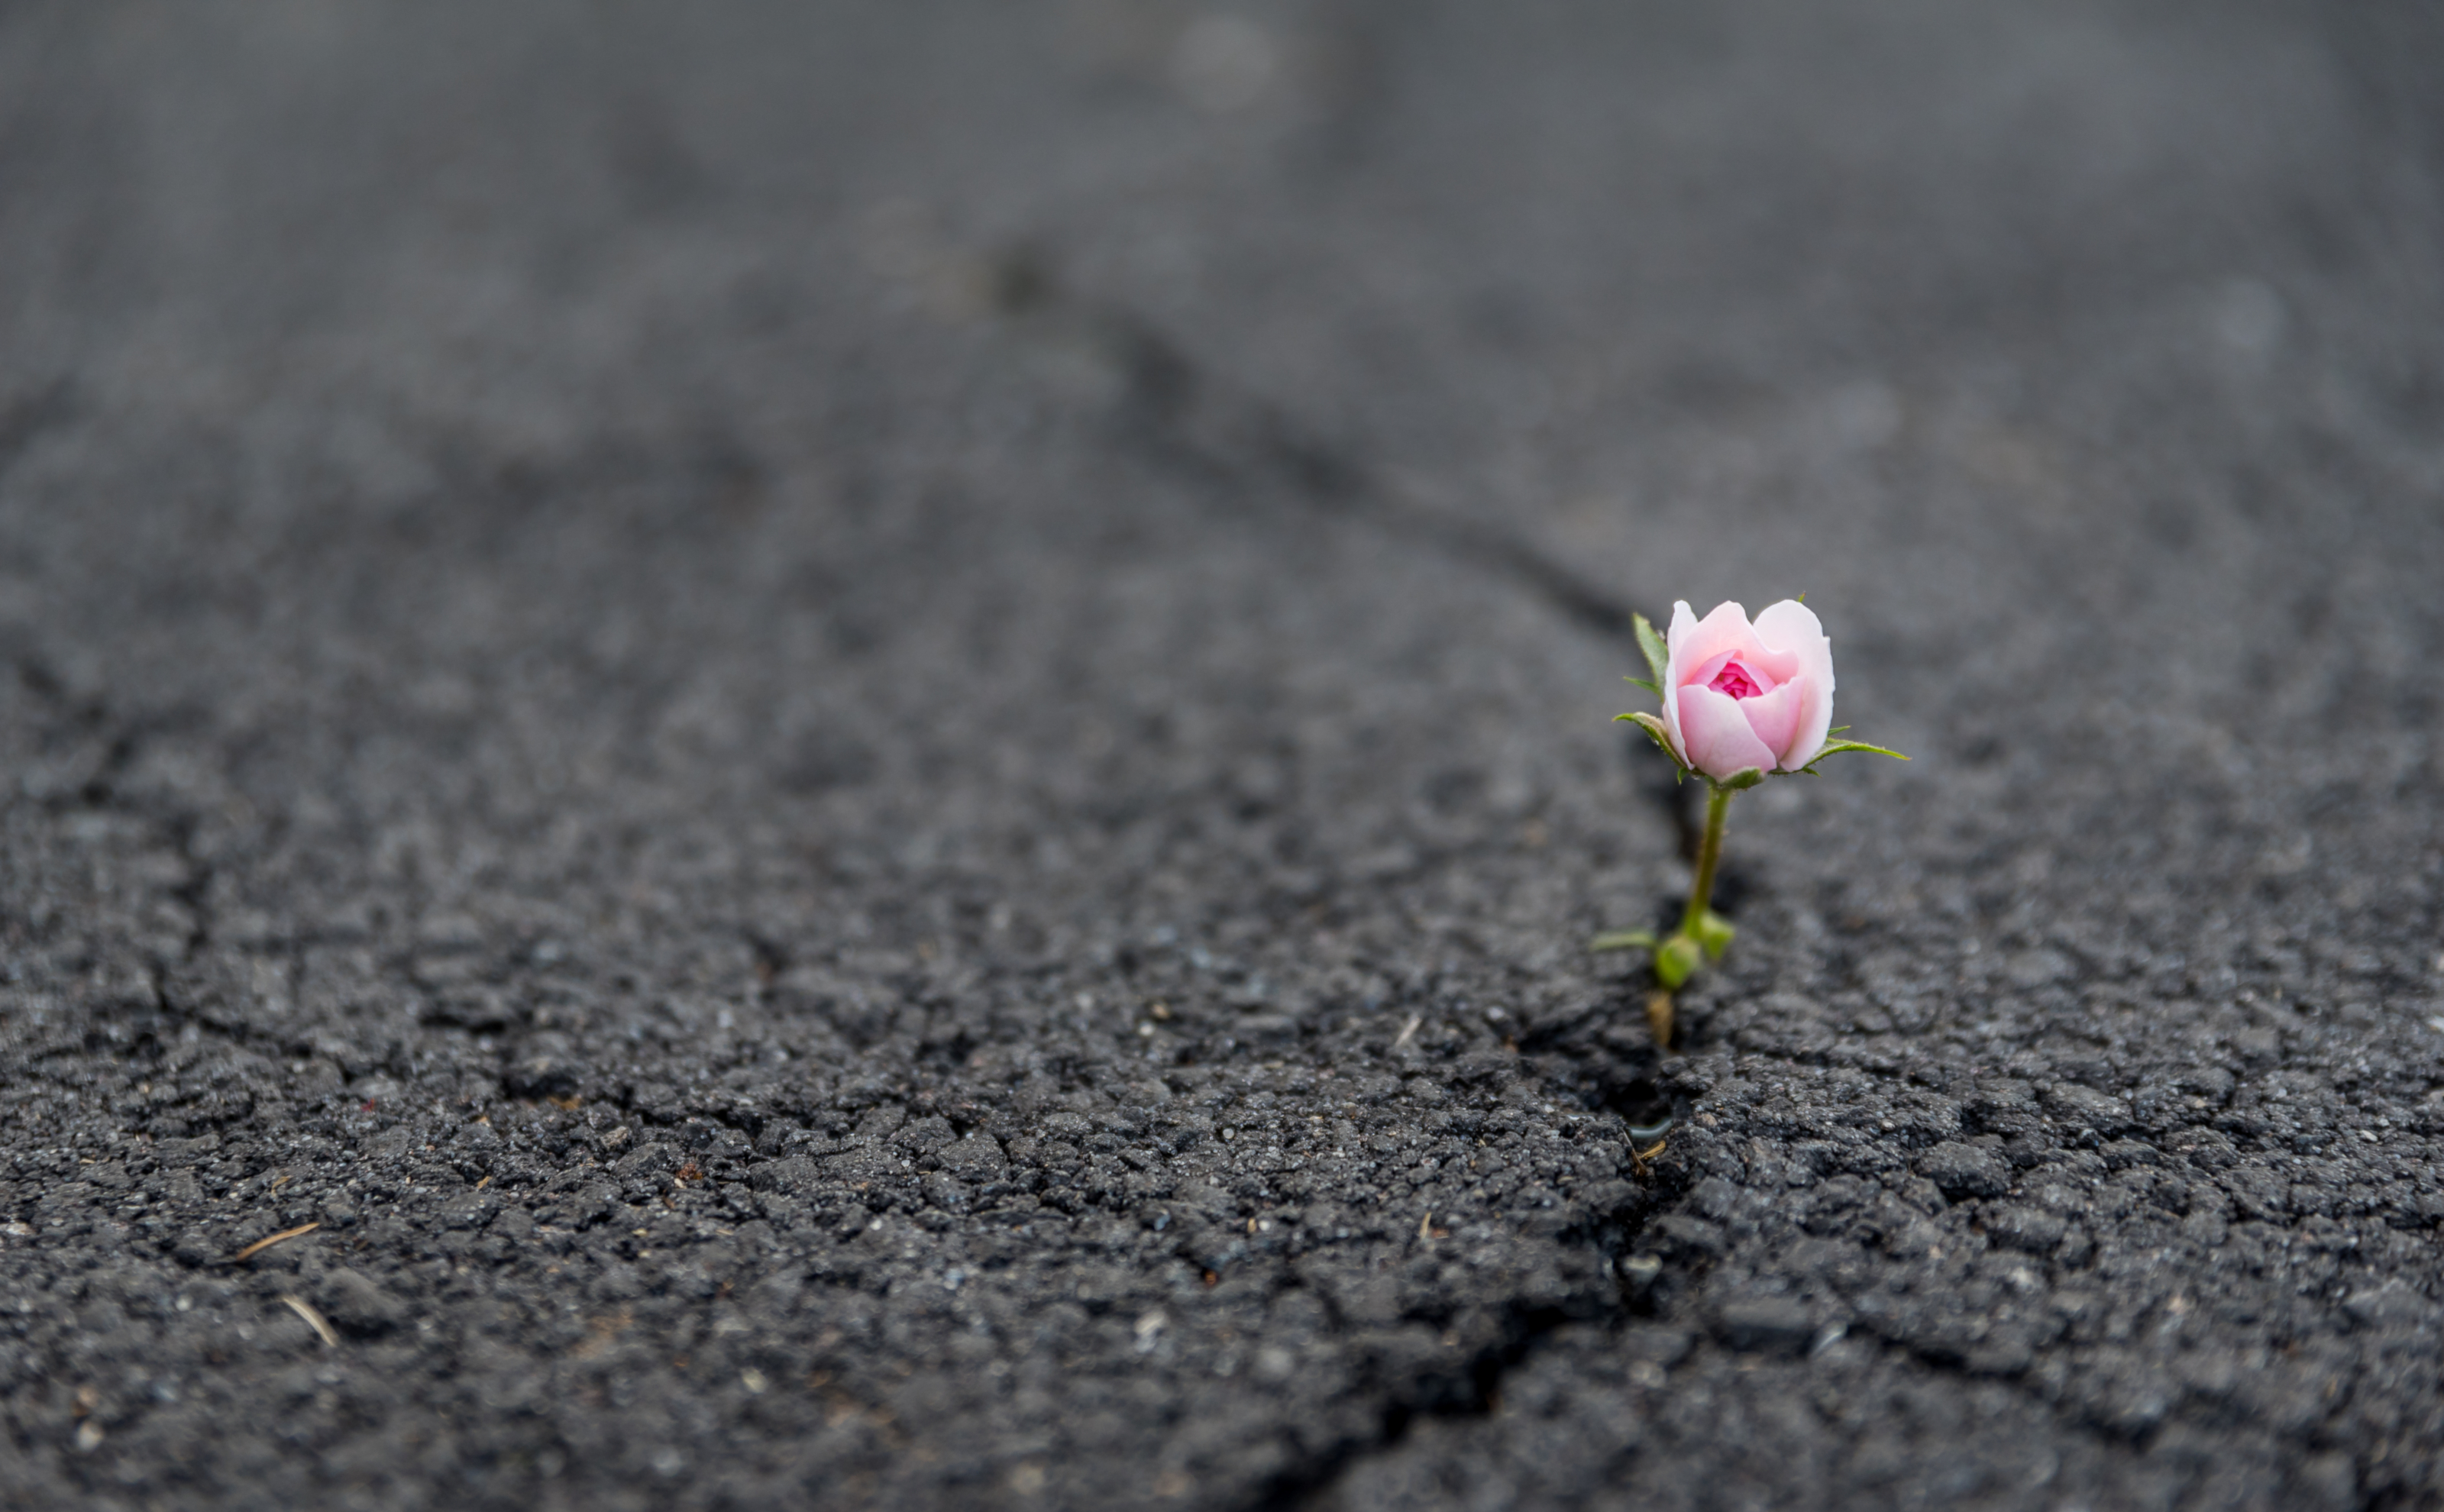 Slideshow Photo (7 of 7); Single flower growing through a crack in asphalt; Labeled: In uncertain times, as change can disrupt past business models RKCS brings resiliency to your teams.